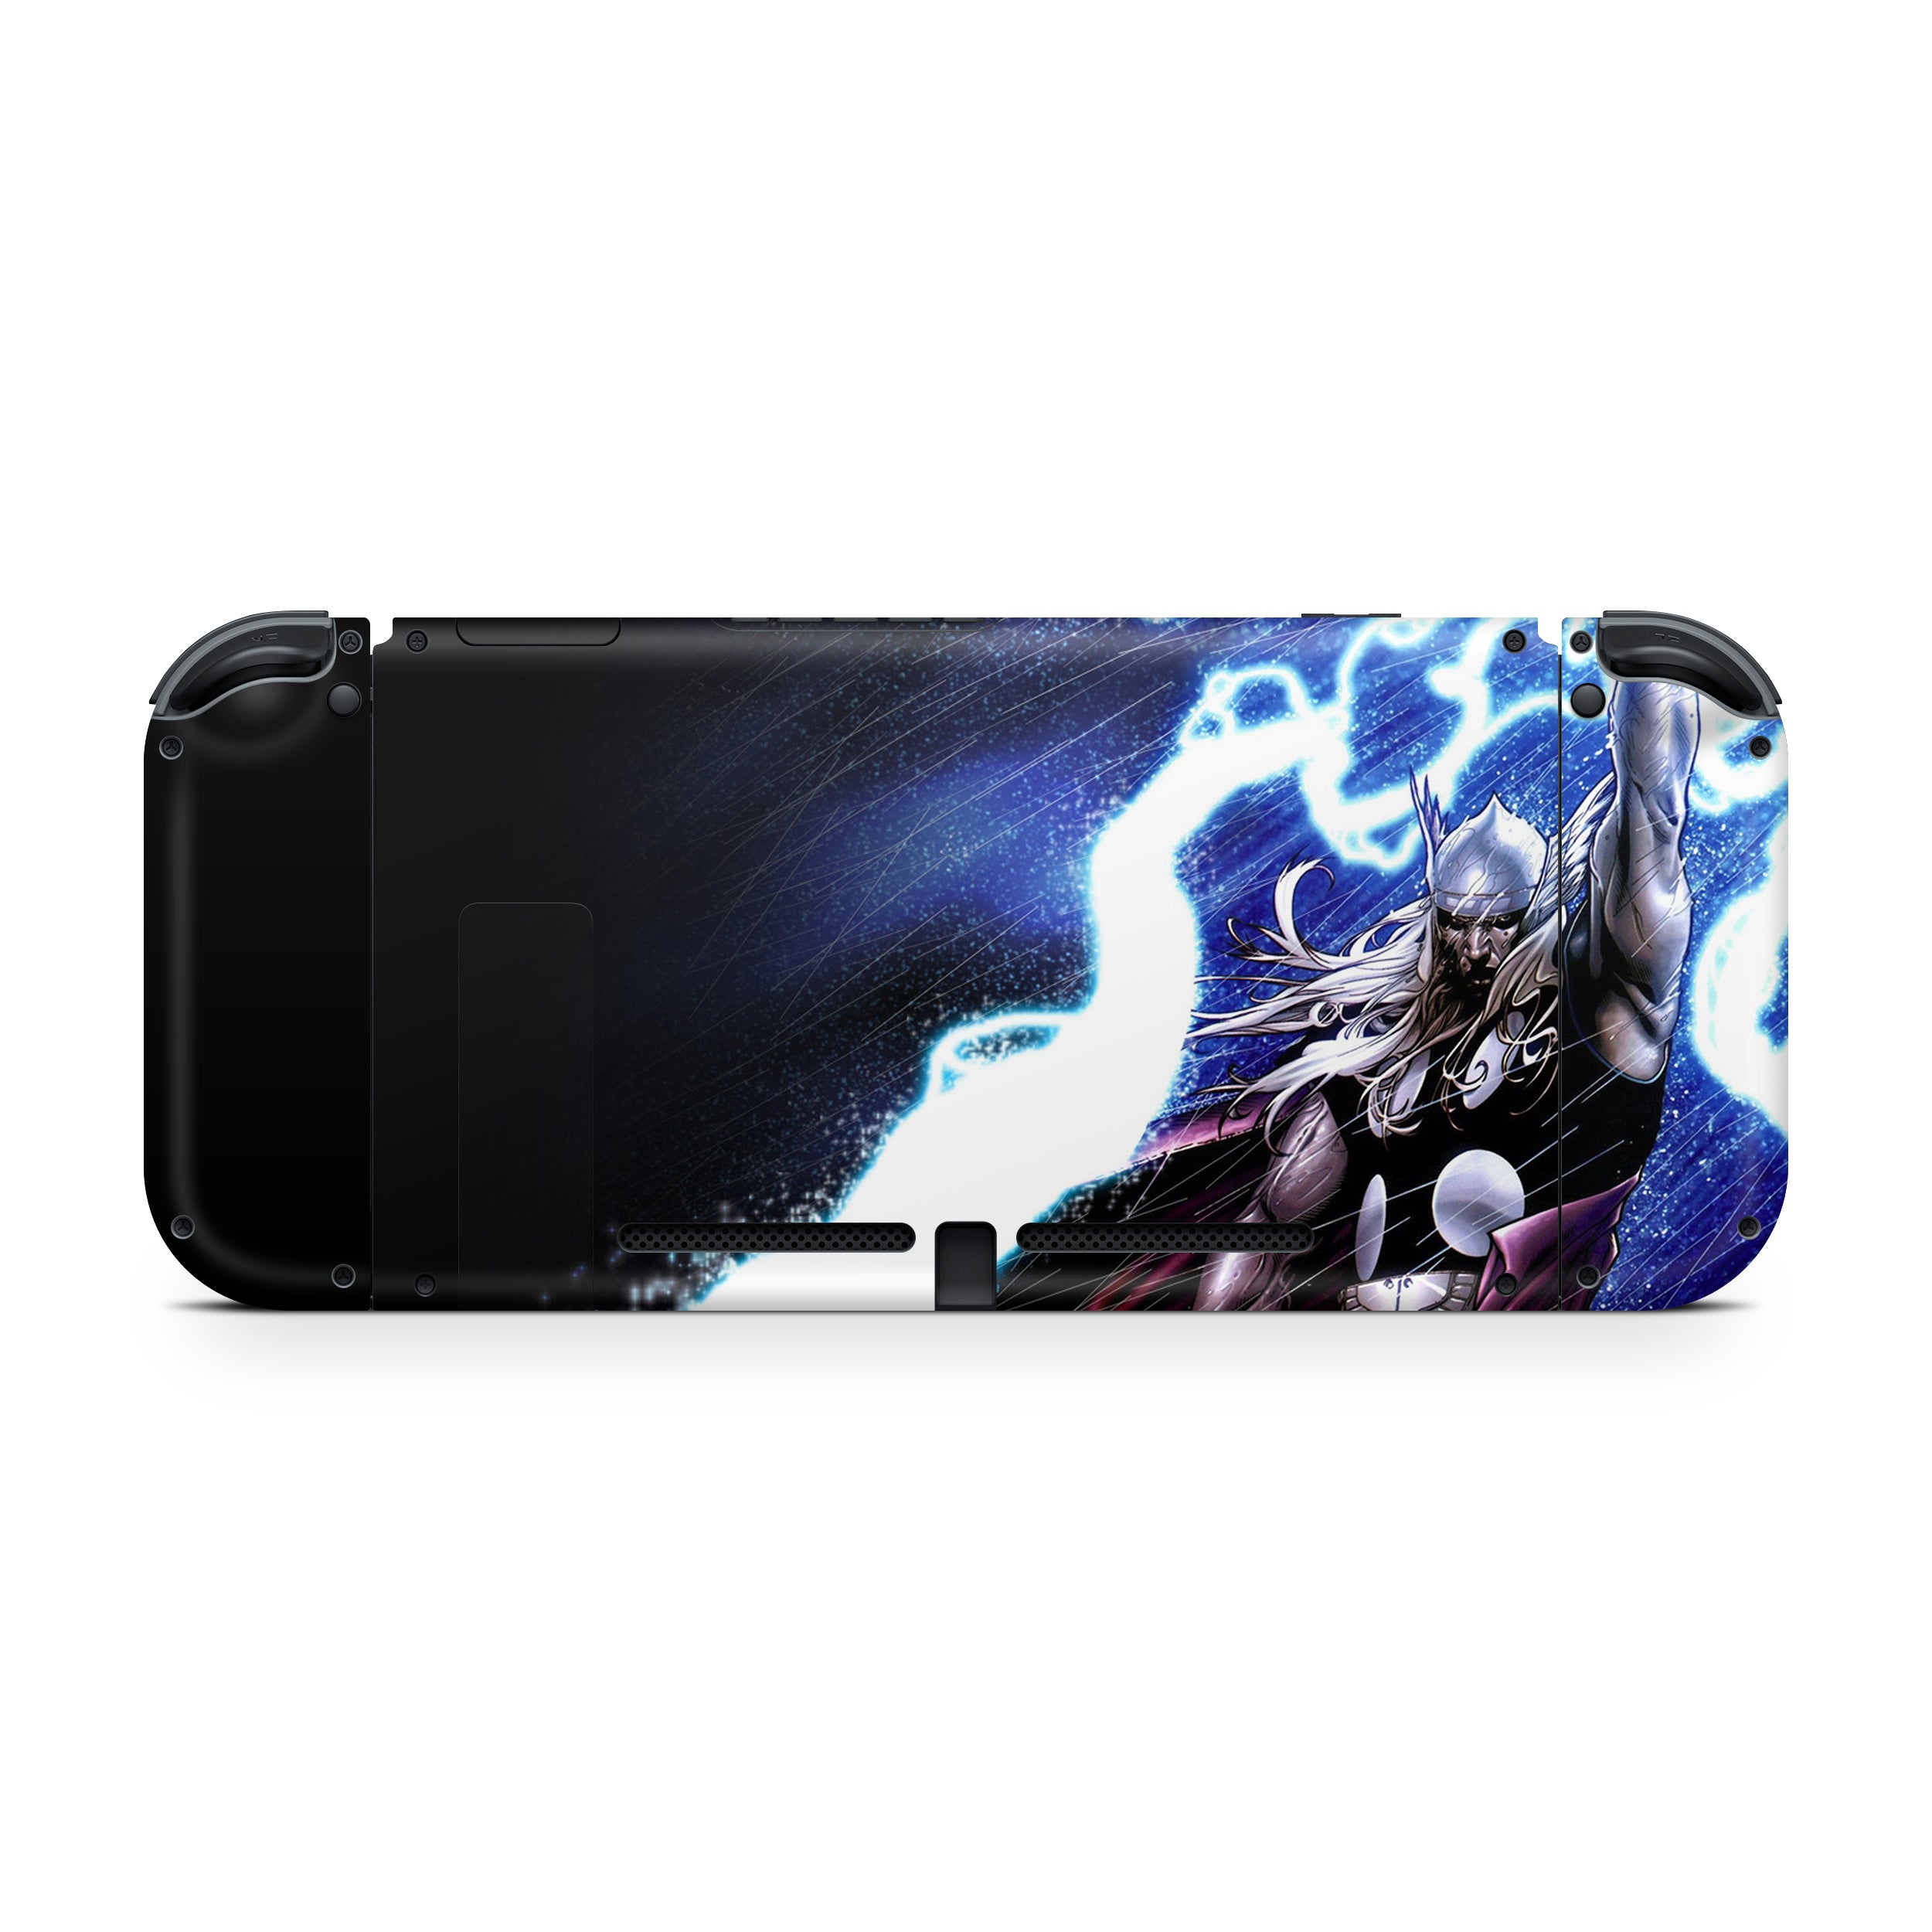 A video game skin featuring a Marvel Comics Thor design for the Nintendo Switch.